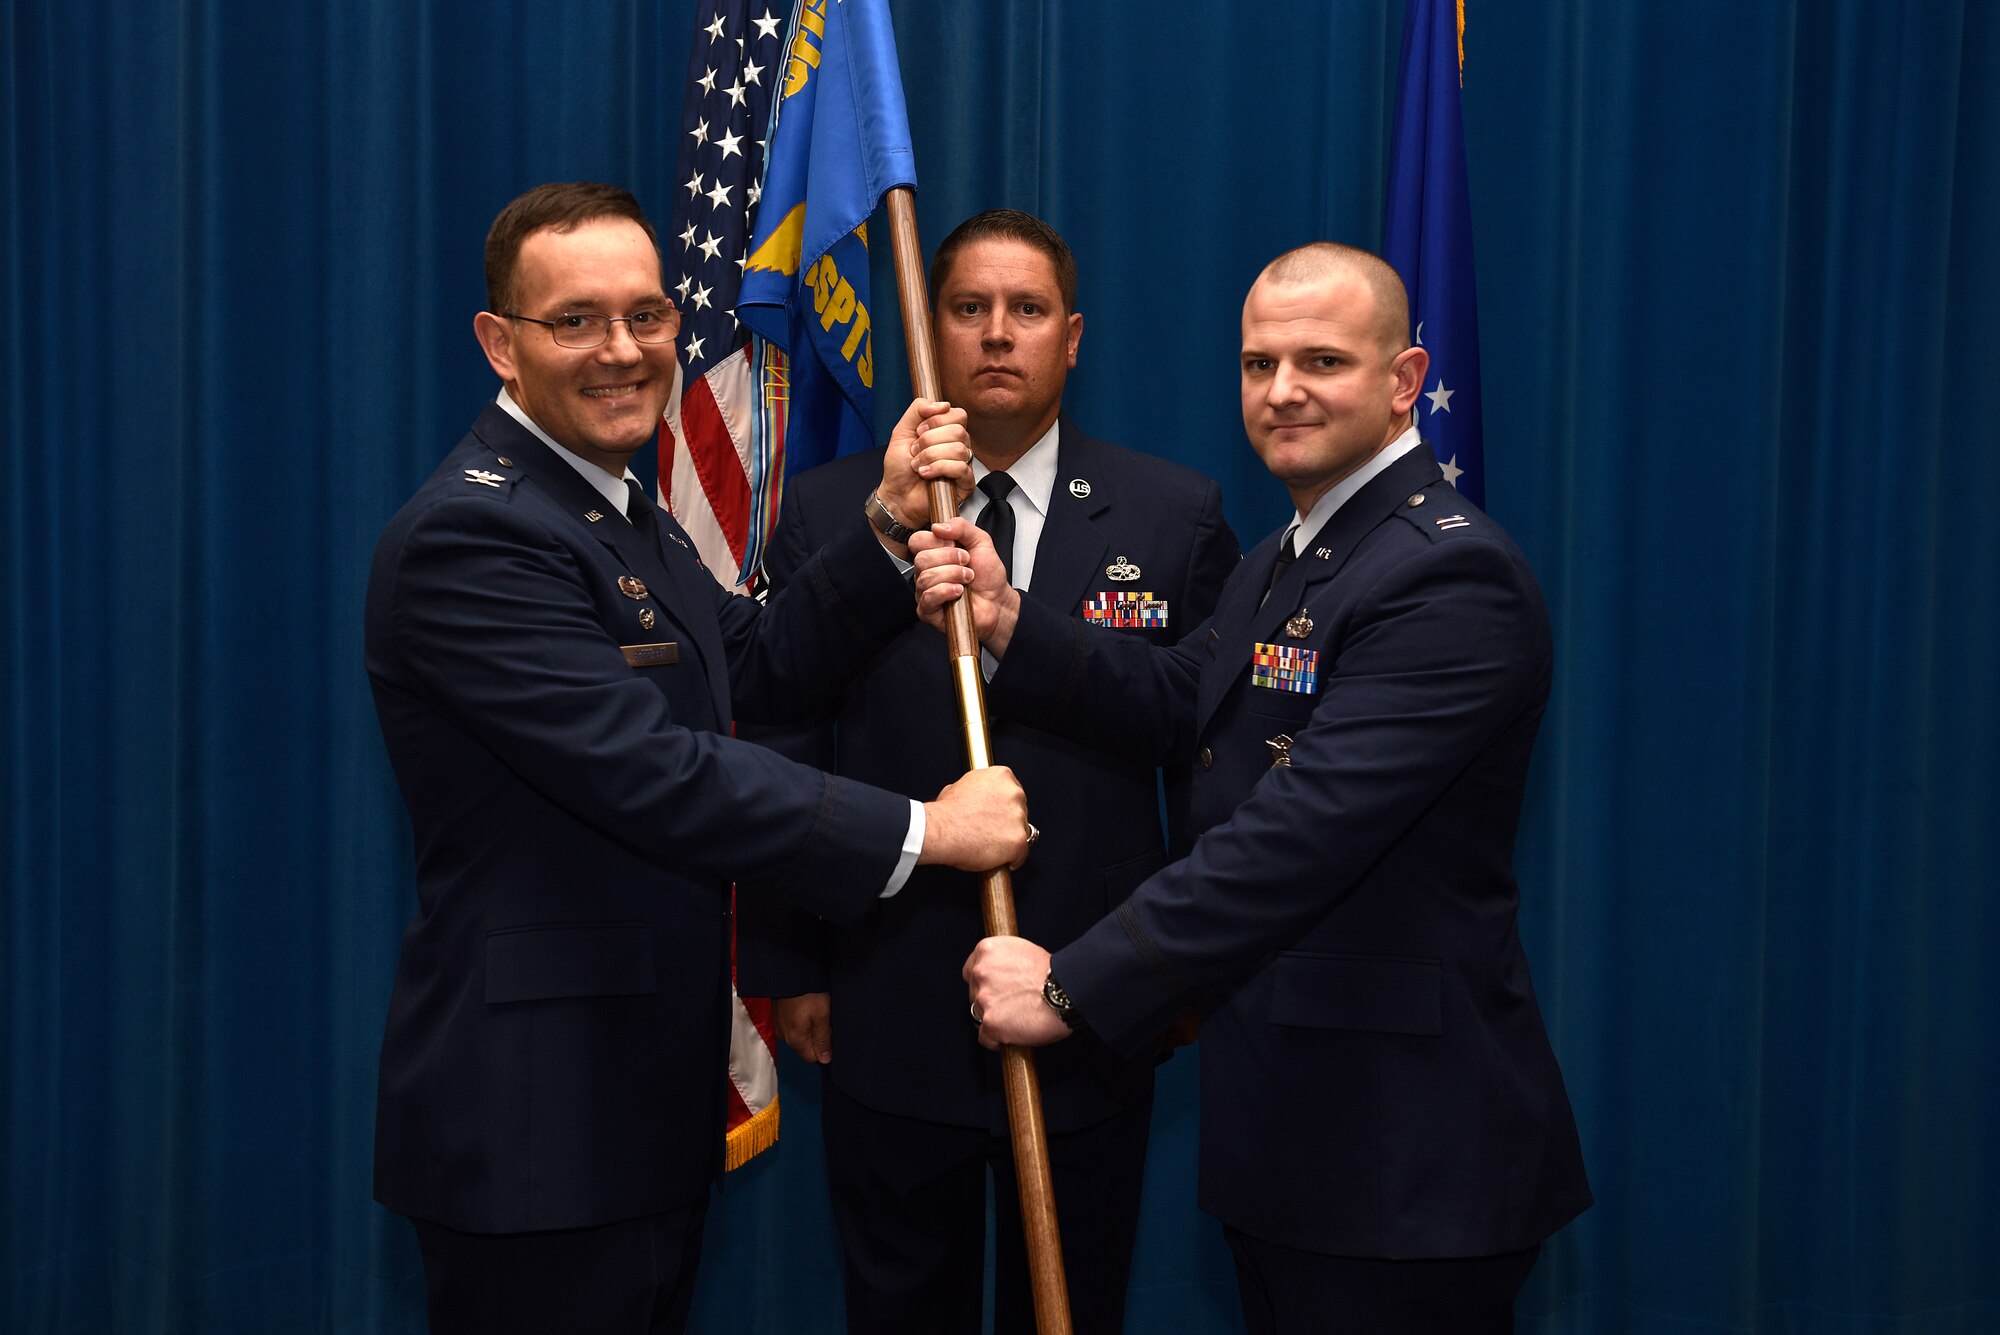 U.S. Air Force Capt. Rudolph McIntyre IV accepts the guidon and command of the 377th Security Support Squadron from Col. Theodore Breuker, 377th Security Forces Group commander, in an assumption of command ceremony at Kirtland Air Force Base, N.M., July 23, 2019. McIntyre comes from Spangdahlem Air Base, Germany, where he was the anti-terrorism officer for the 52nd Fighter Wing. (U.S. Air Force photo by Airman 1st Class Austin J. Prisbrey)